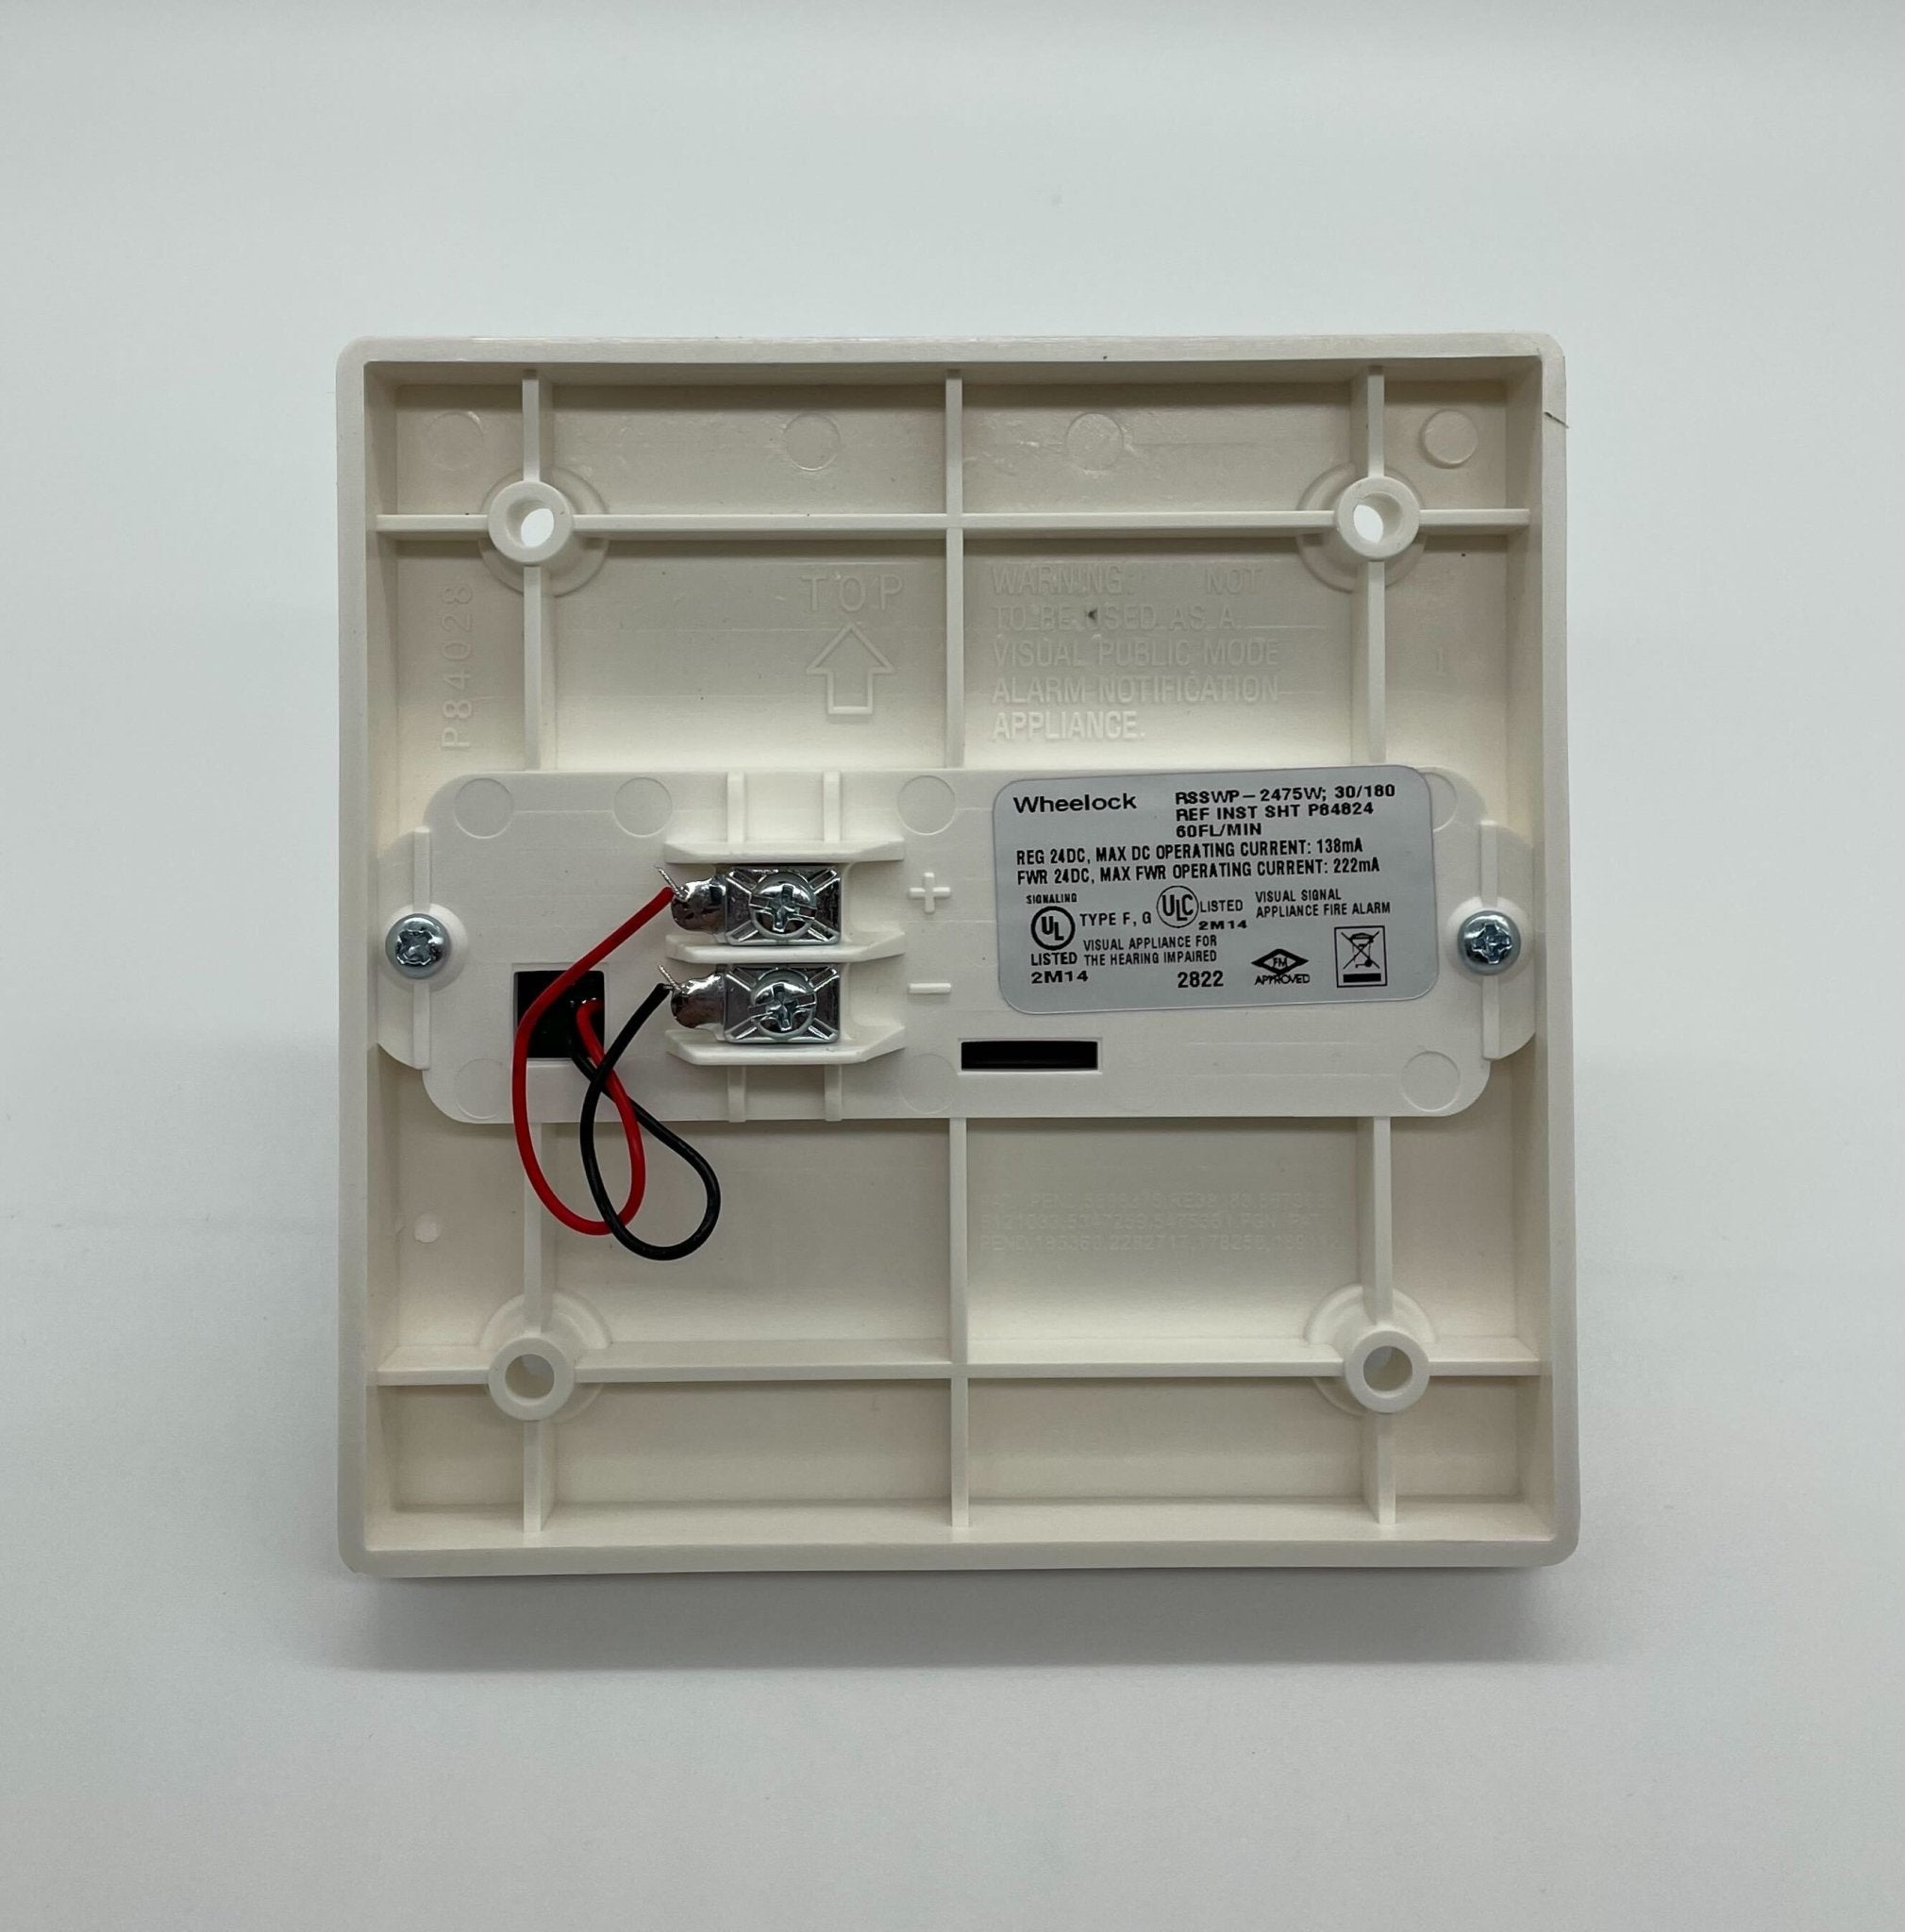 Wheelock RSSWP-2475W-FW - The Fire Alarm Supplier